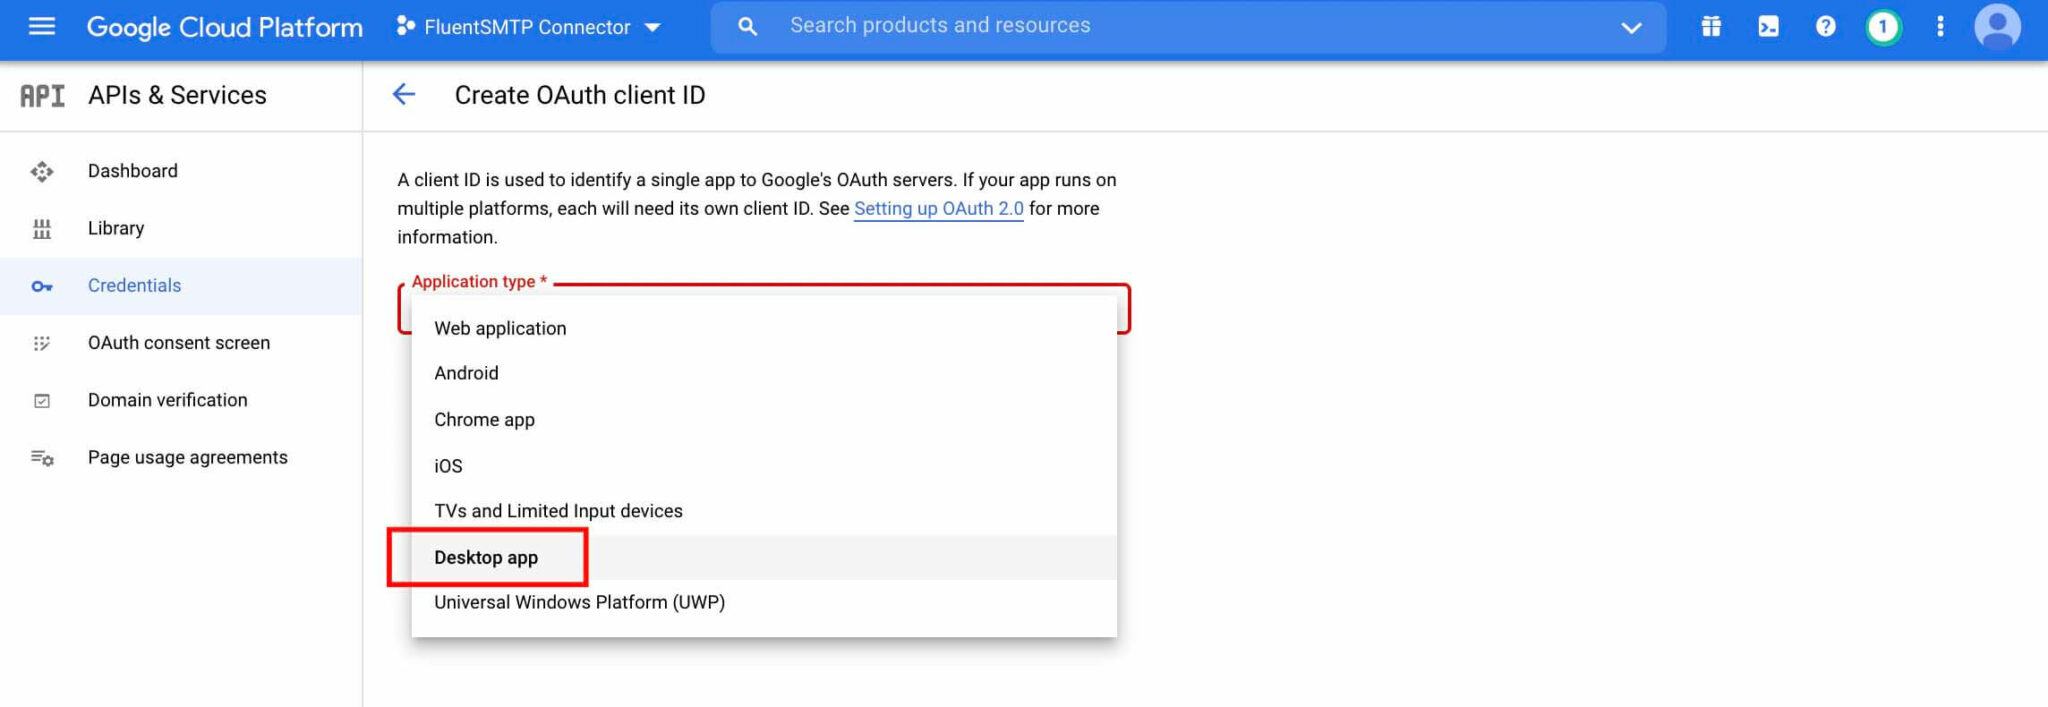 how to uninstall inbox app for gmail